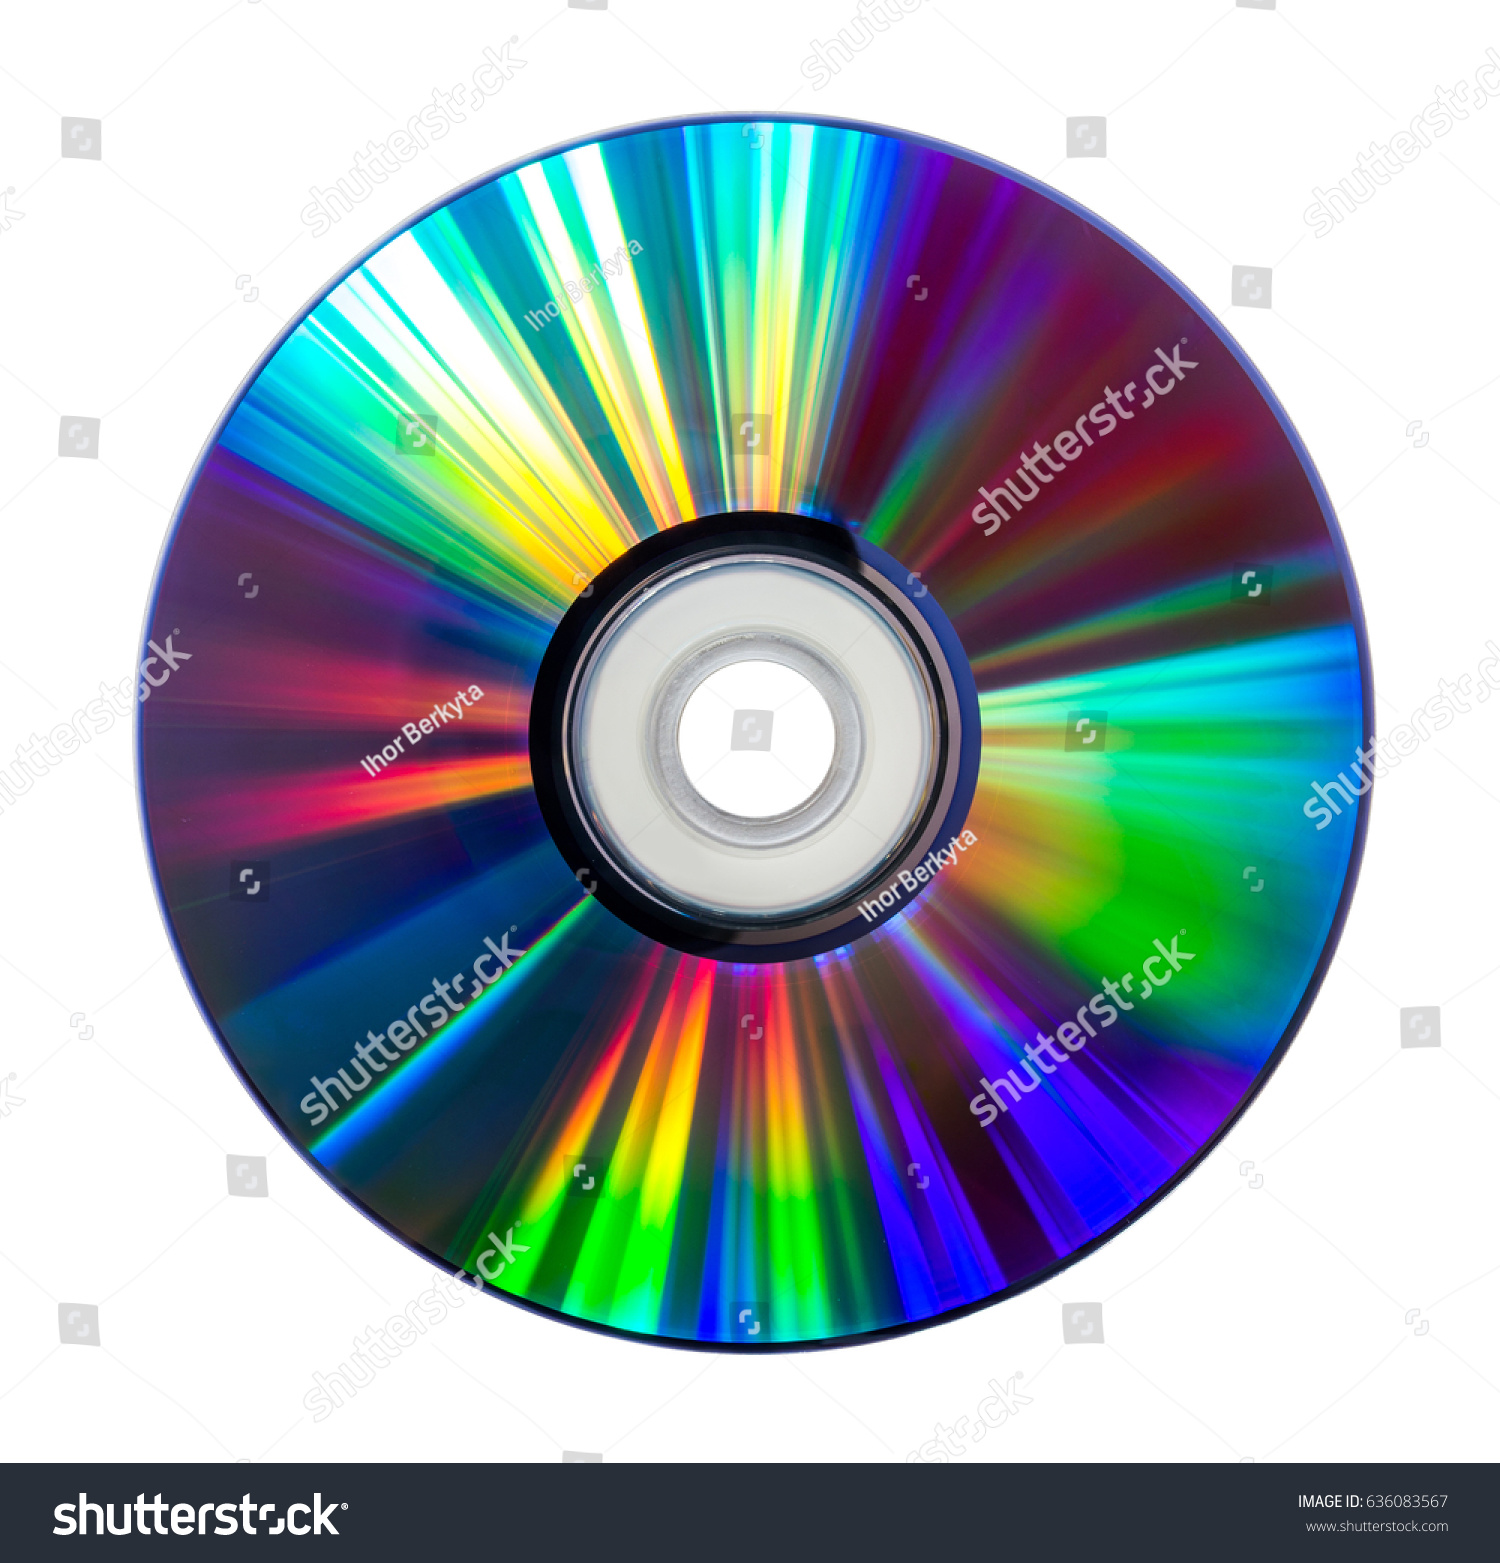 Colorful compact disc isolated on a white background #636083567